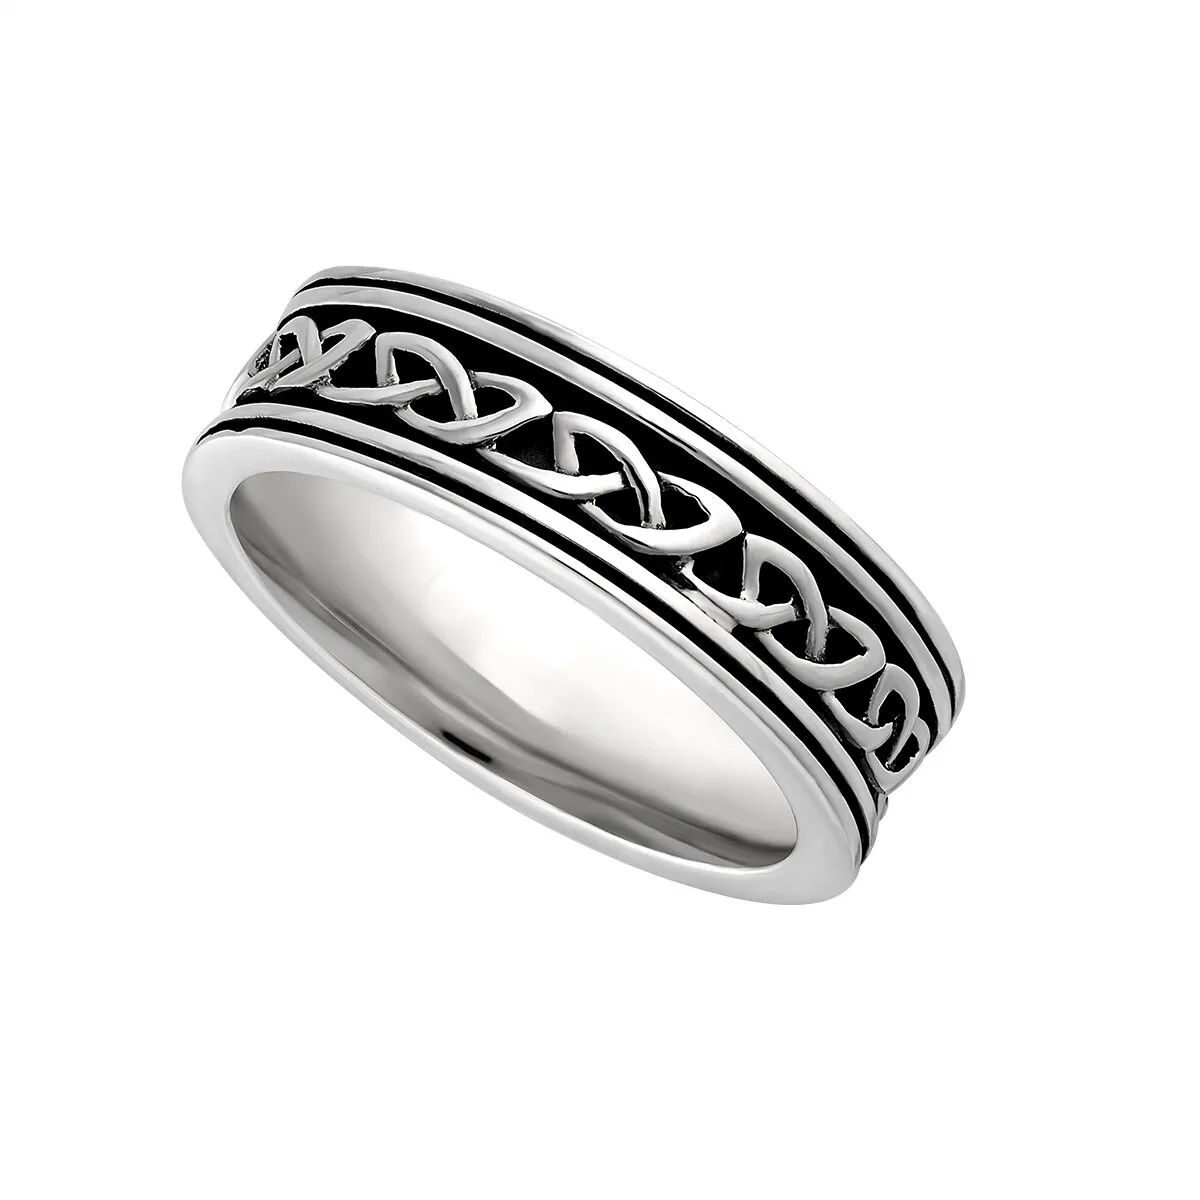 Oxidized Sterling Silver Ladies Celtic Ring...